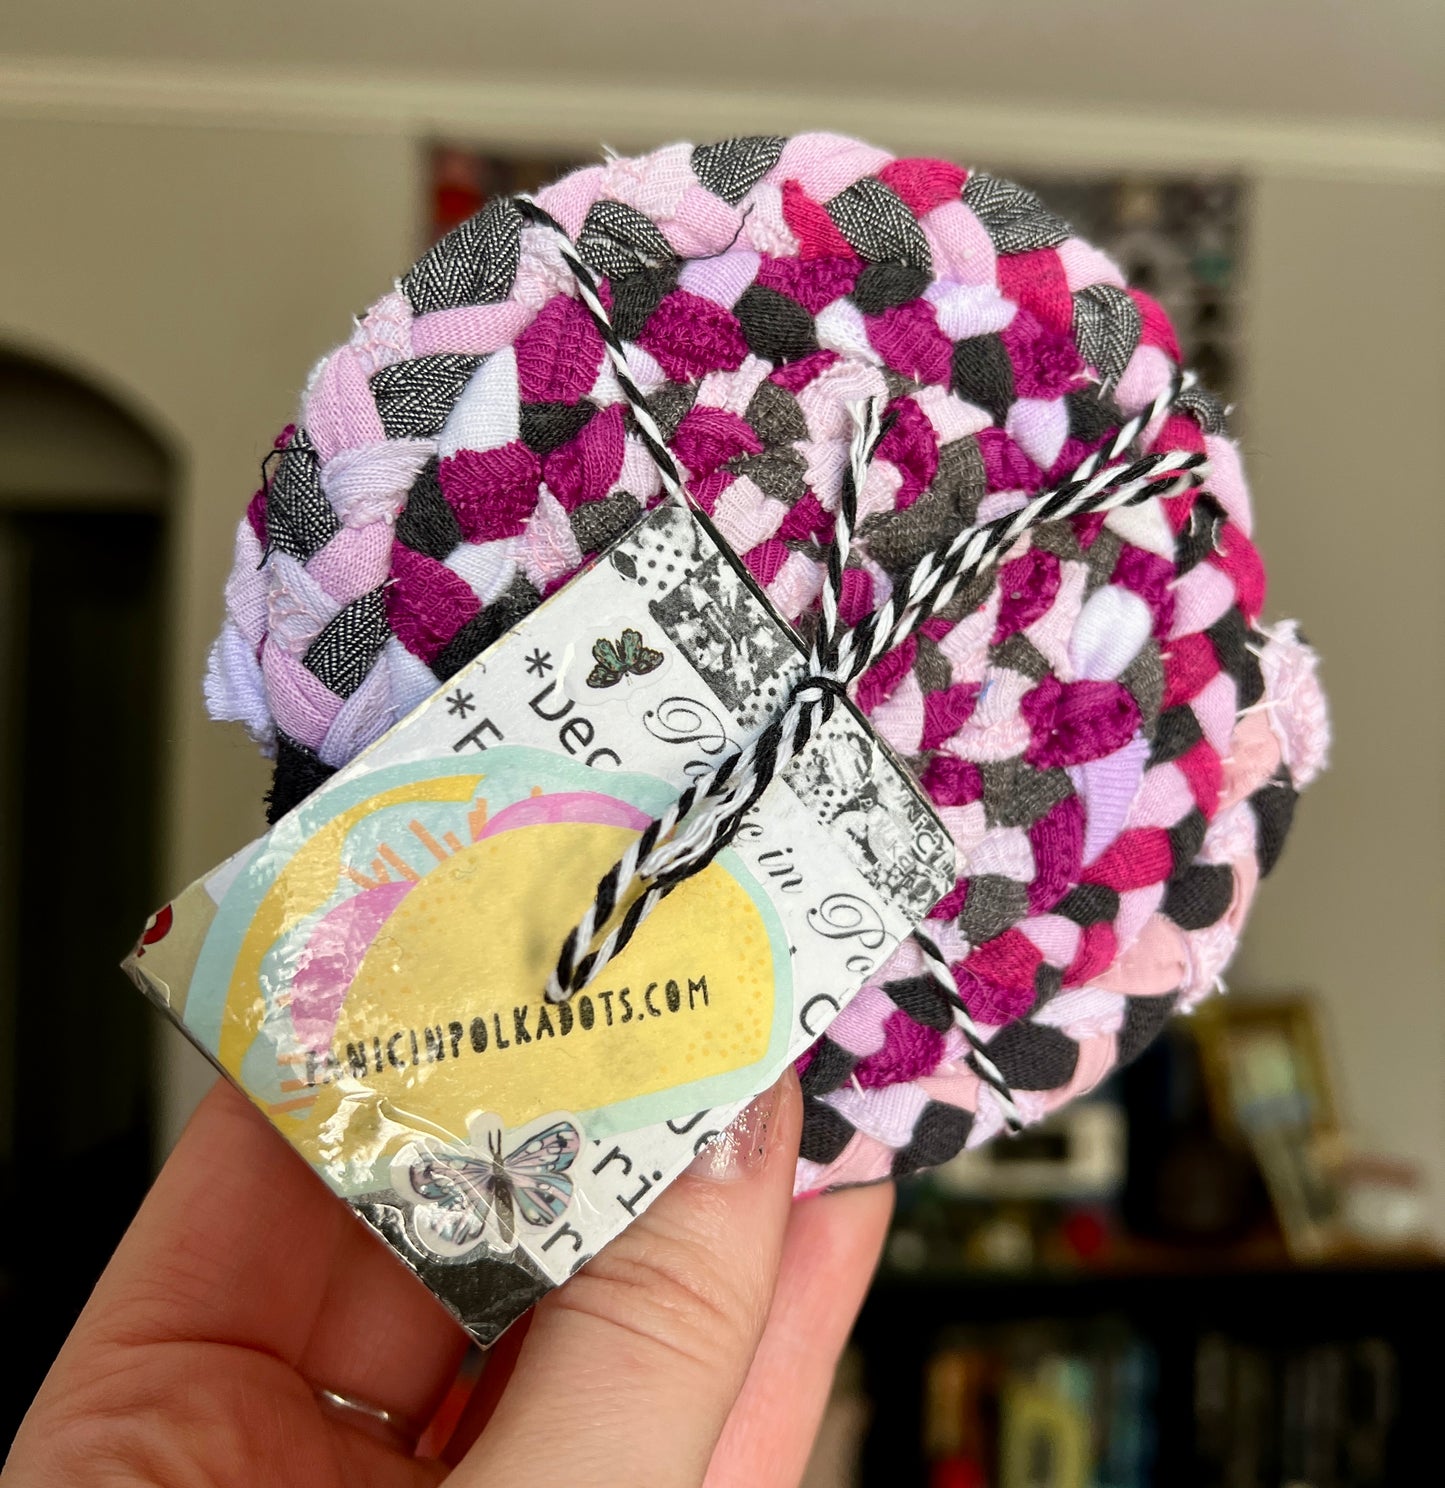 pink coasters, held up hand for scale, a tag with taco and Panicinpolkadots.com